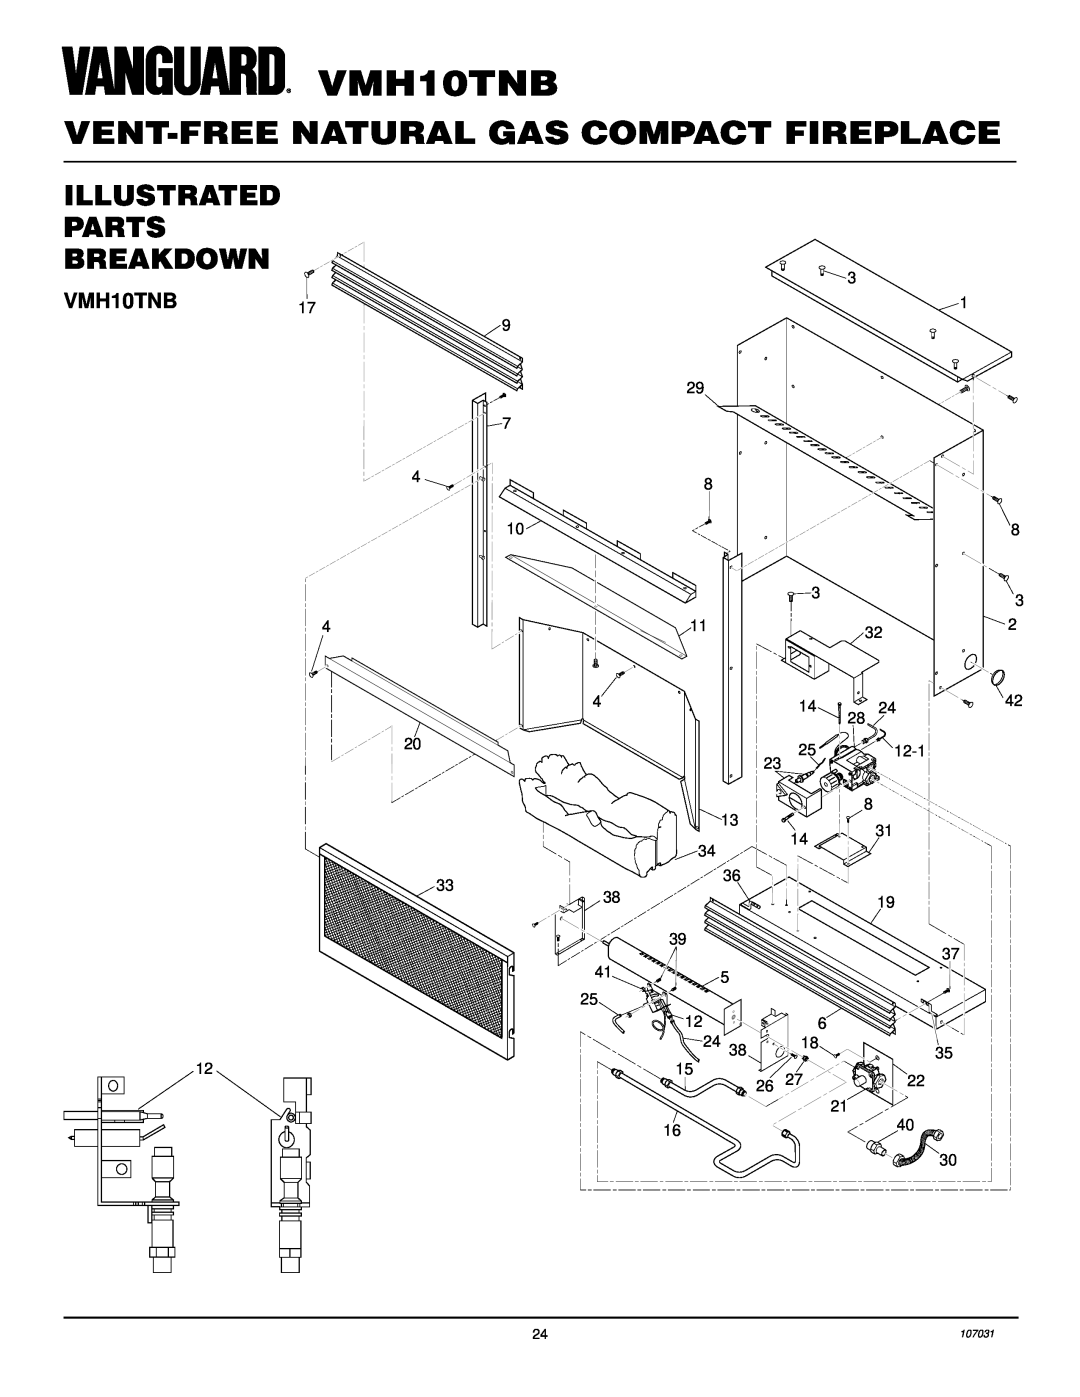 Vanguard Heating installation manual Illustrated Parts Breakdown, Vent-Freenatural Gas Compact Fireplace, VMH10TNB17 